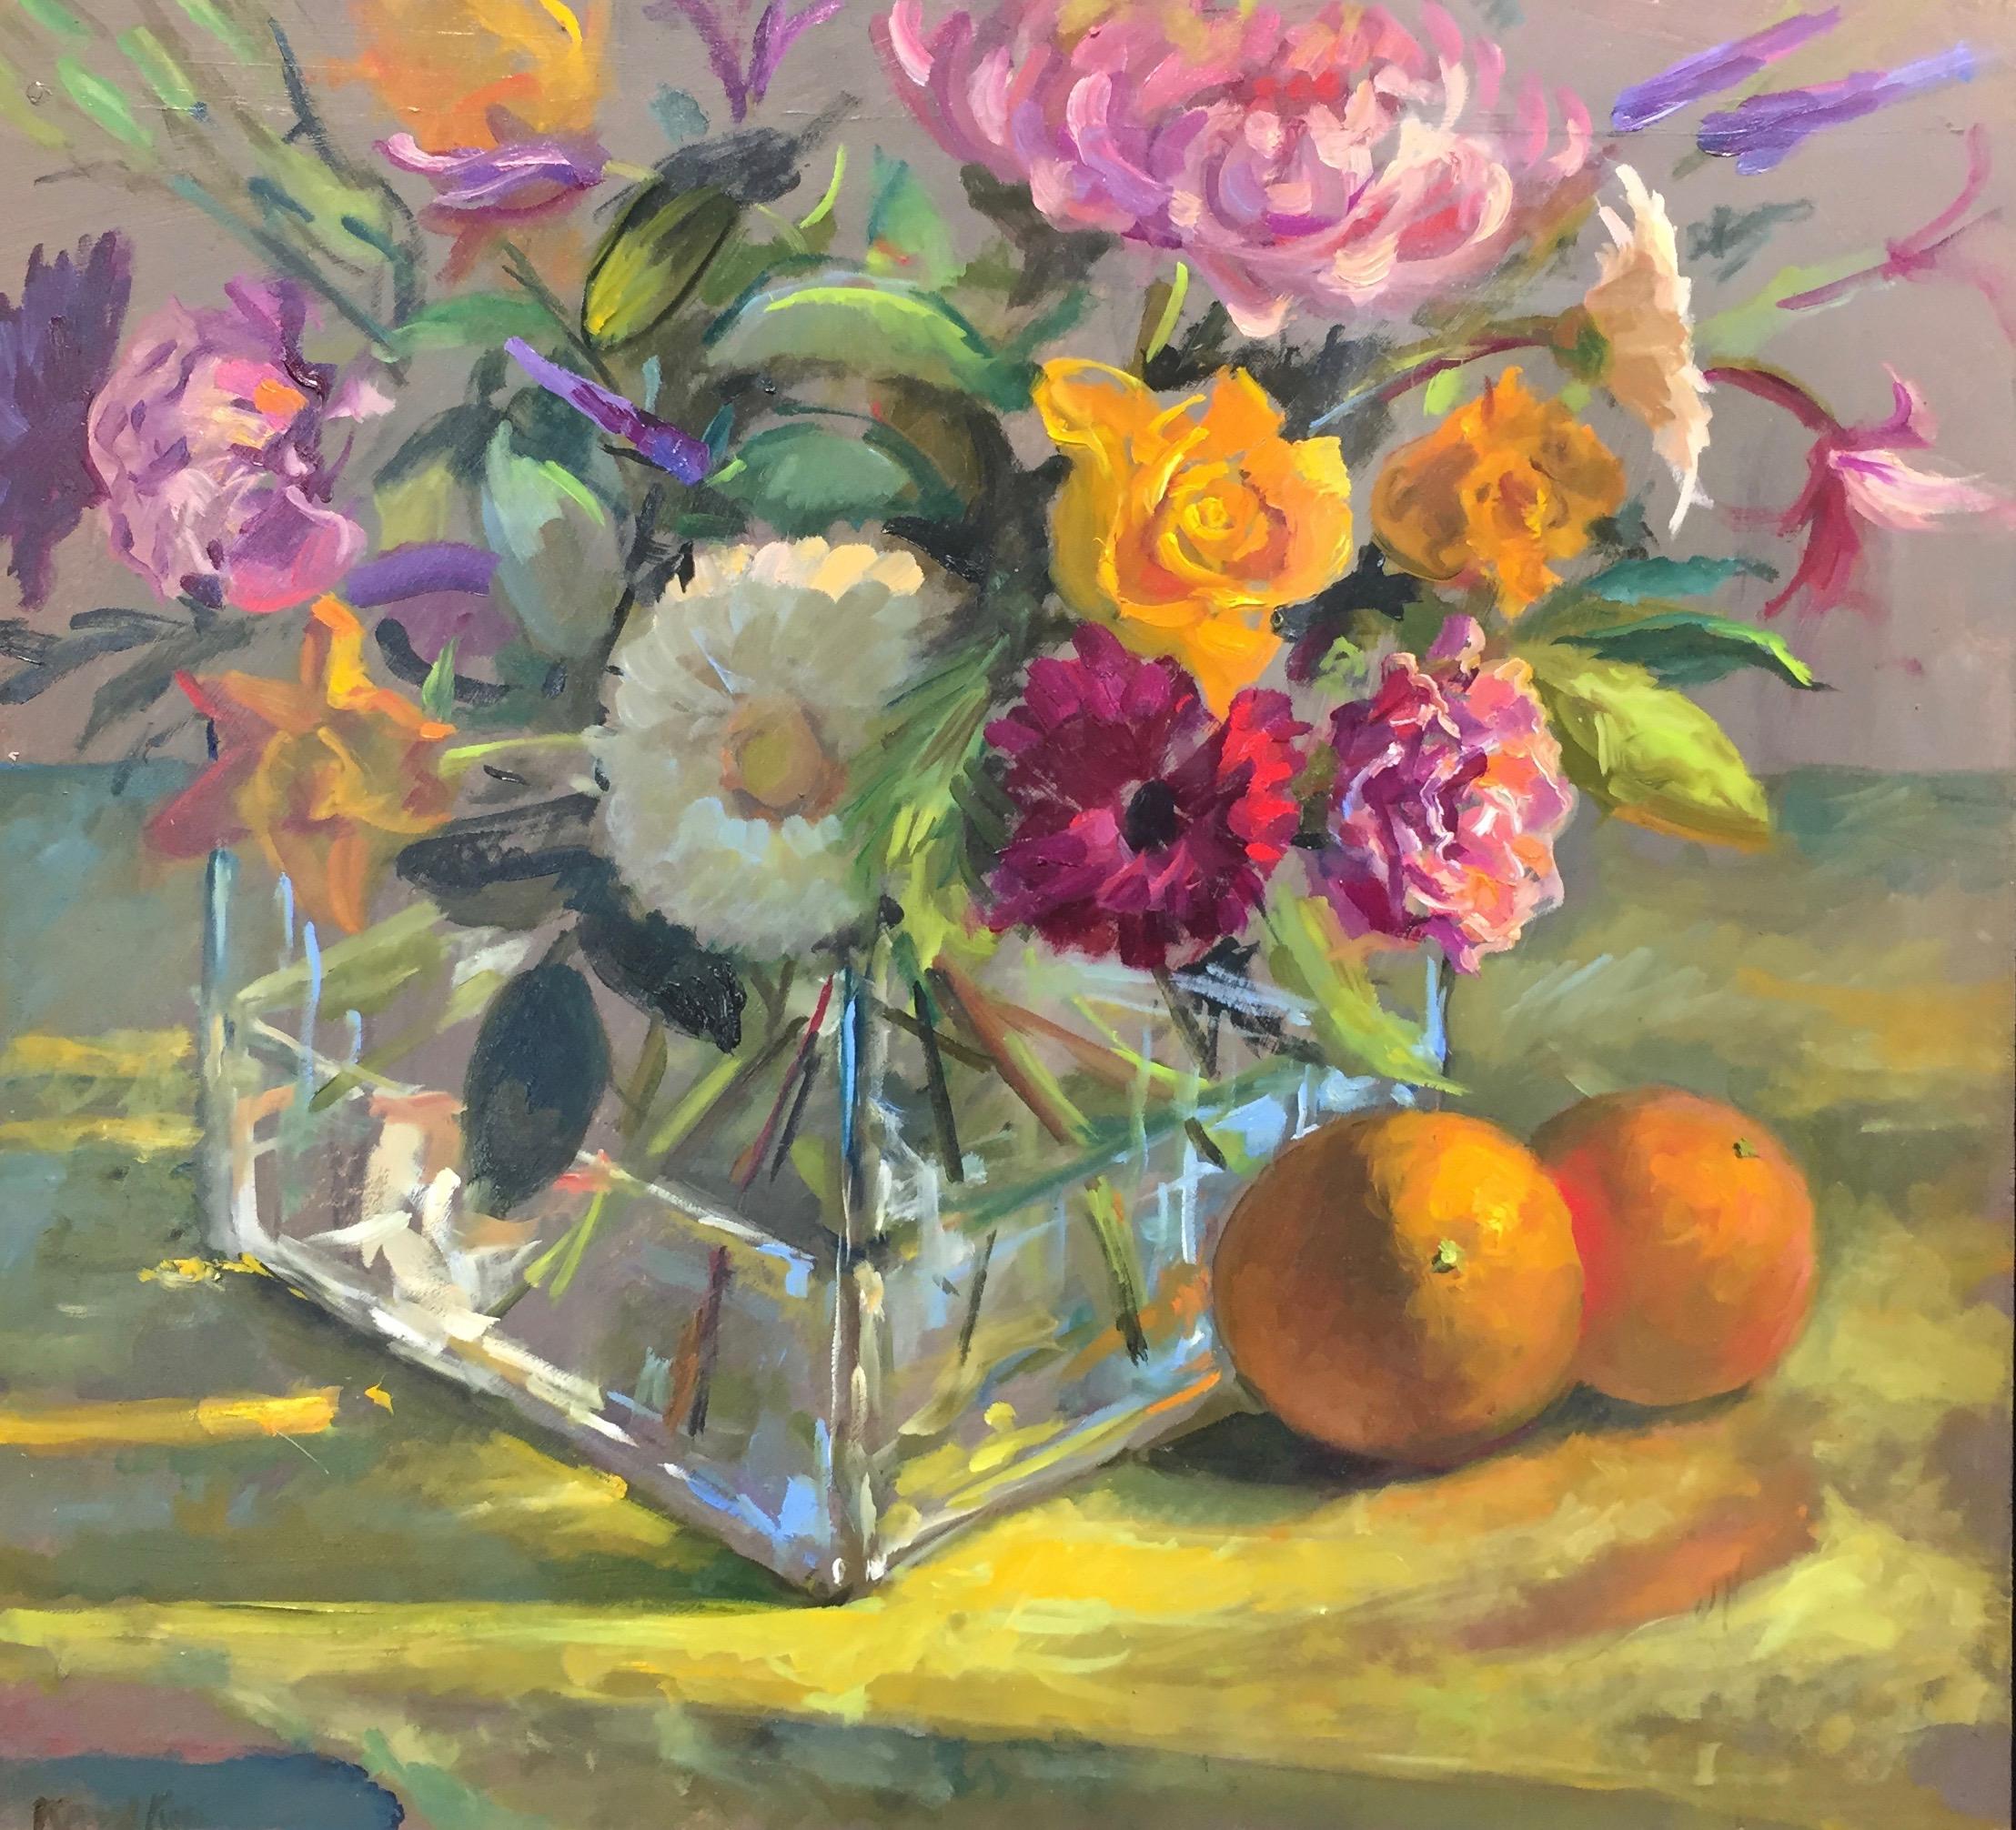 Mothers Day- 21st Century Contemporary Dutch Flower Still-life Painting